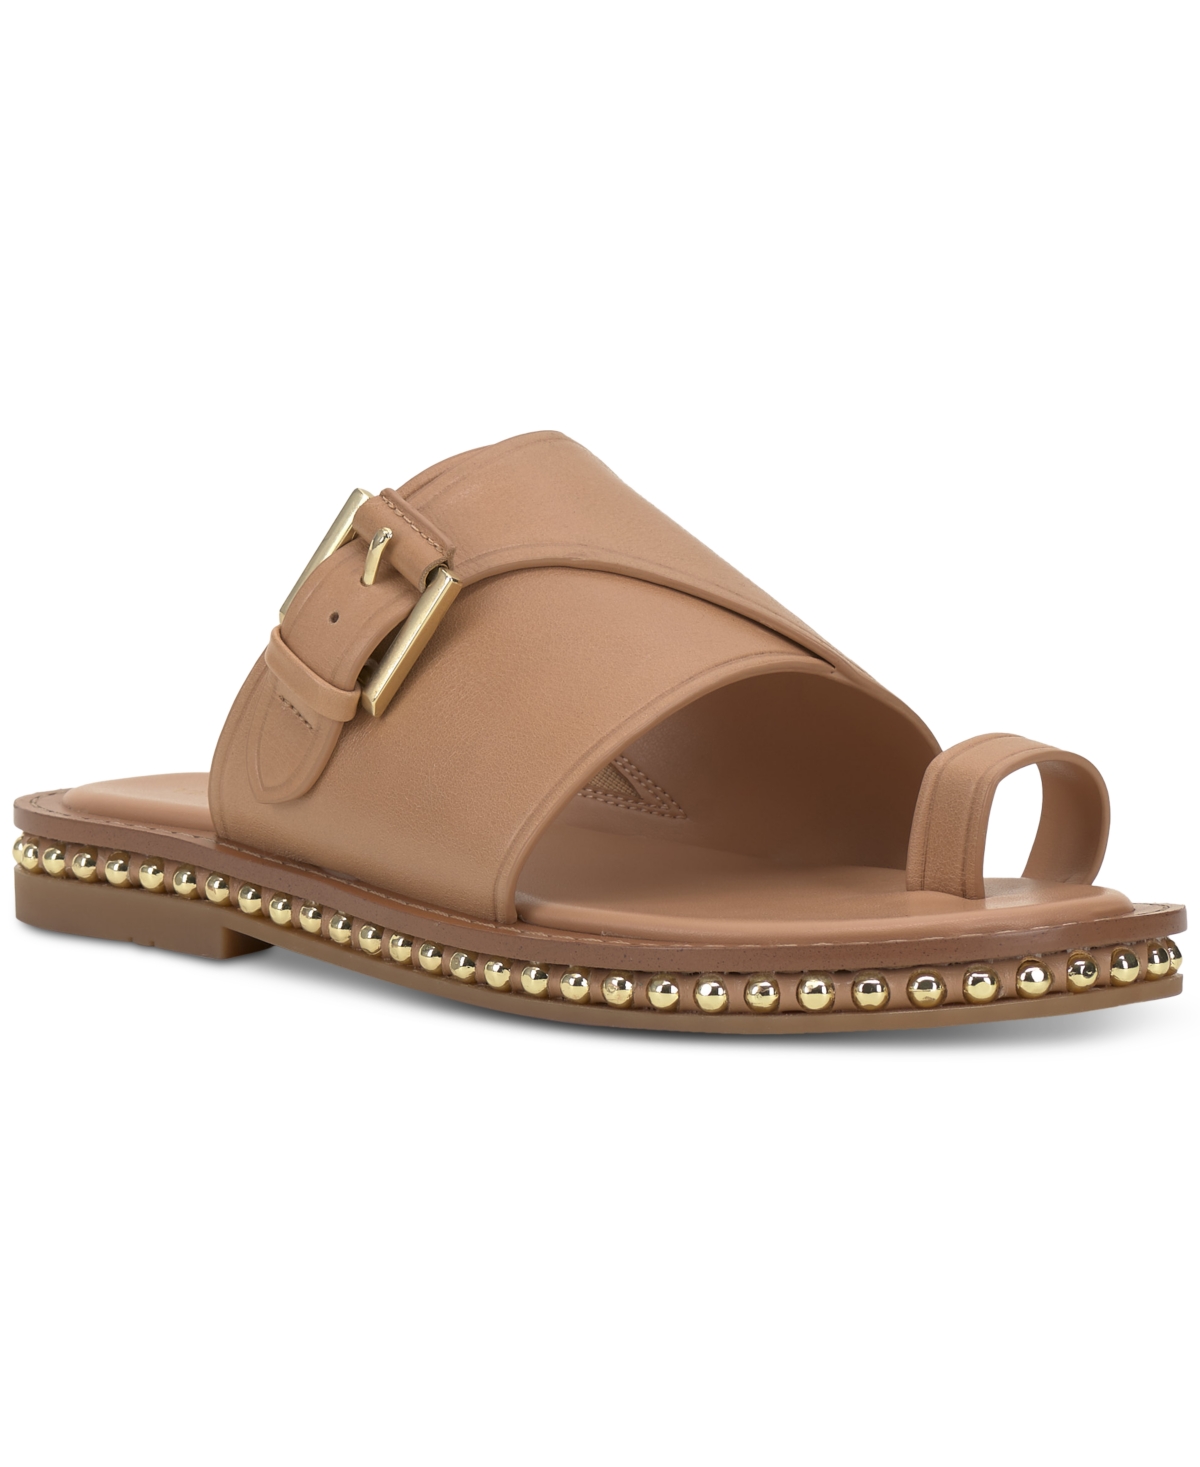 VINCE CAMUTO WOMEN'S COOLIANN HOODED THONG FLAT SANDALS